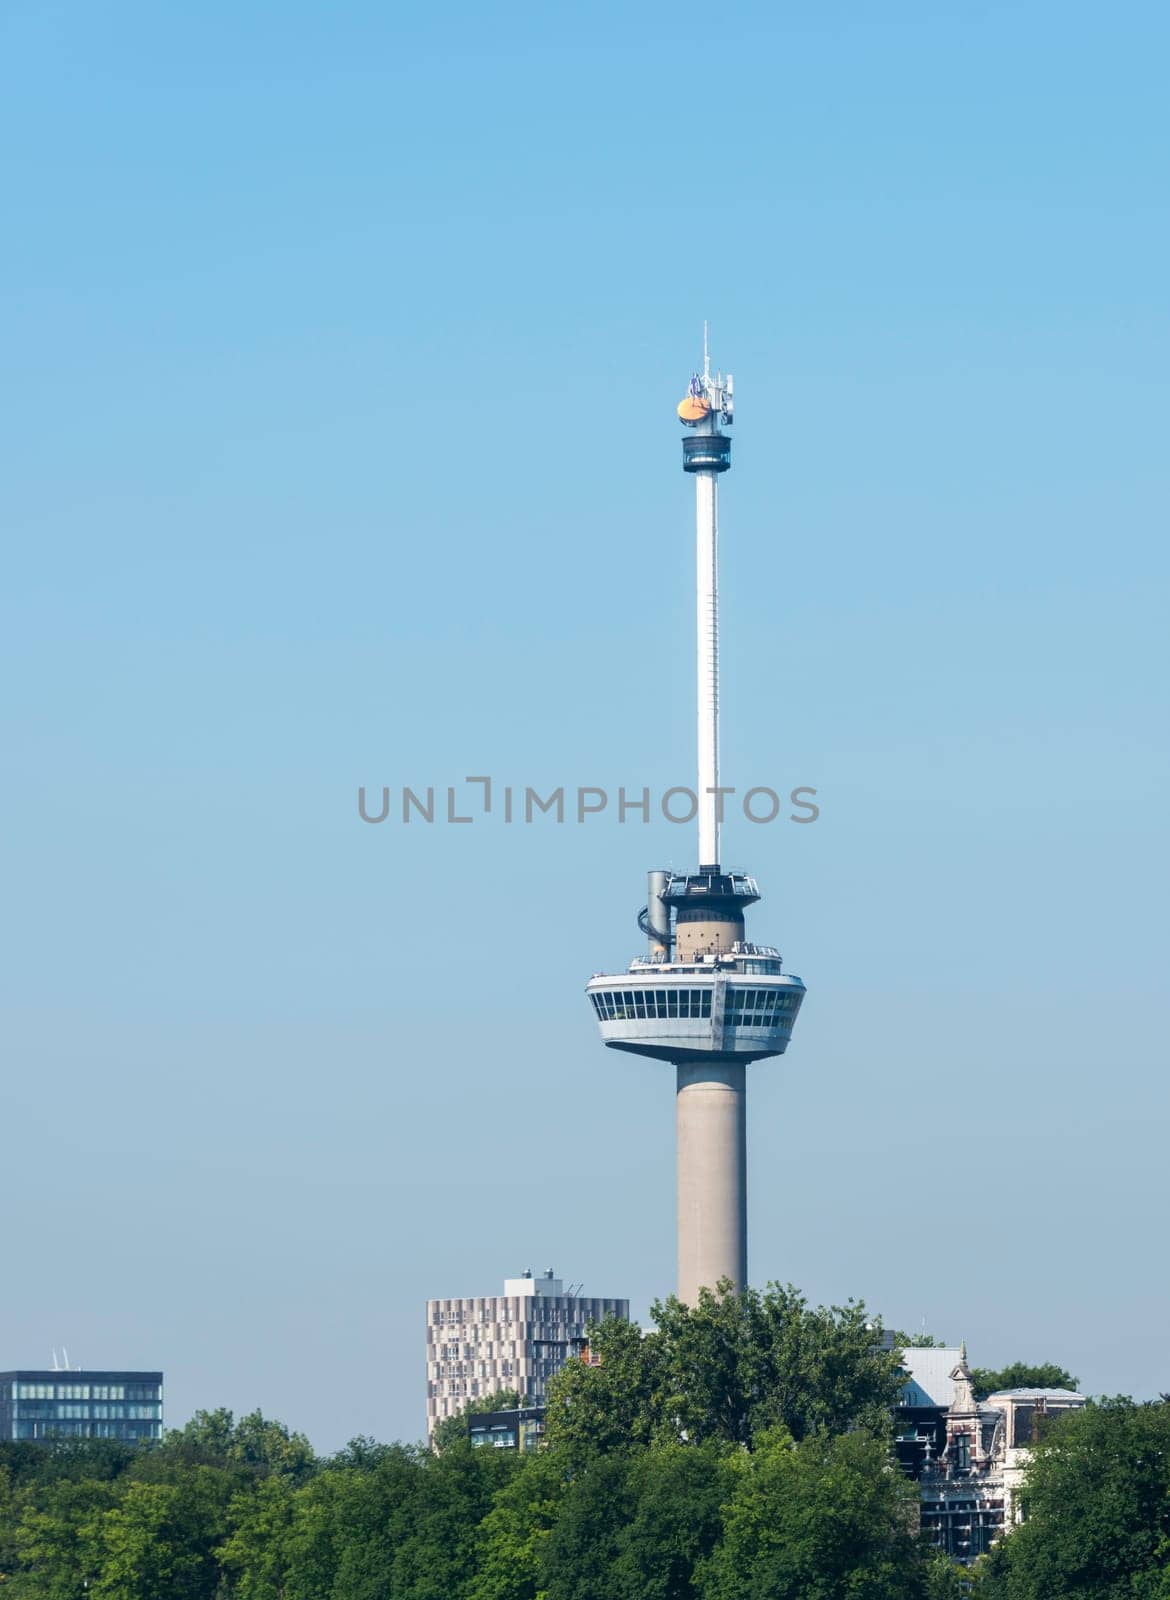 euromast tower in Rotterdam by compuinfoto